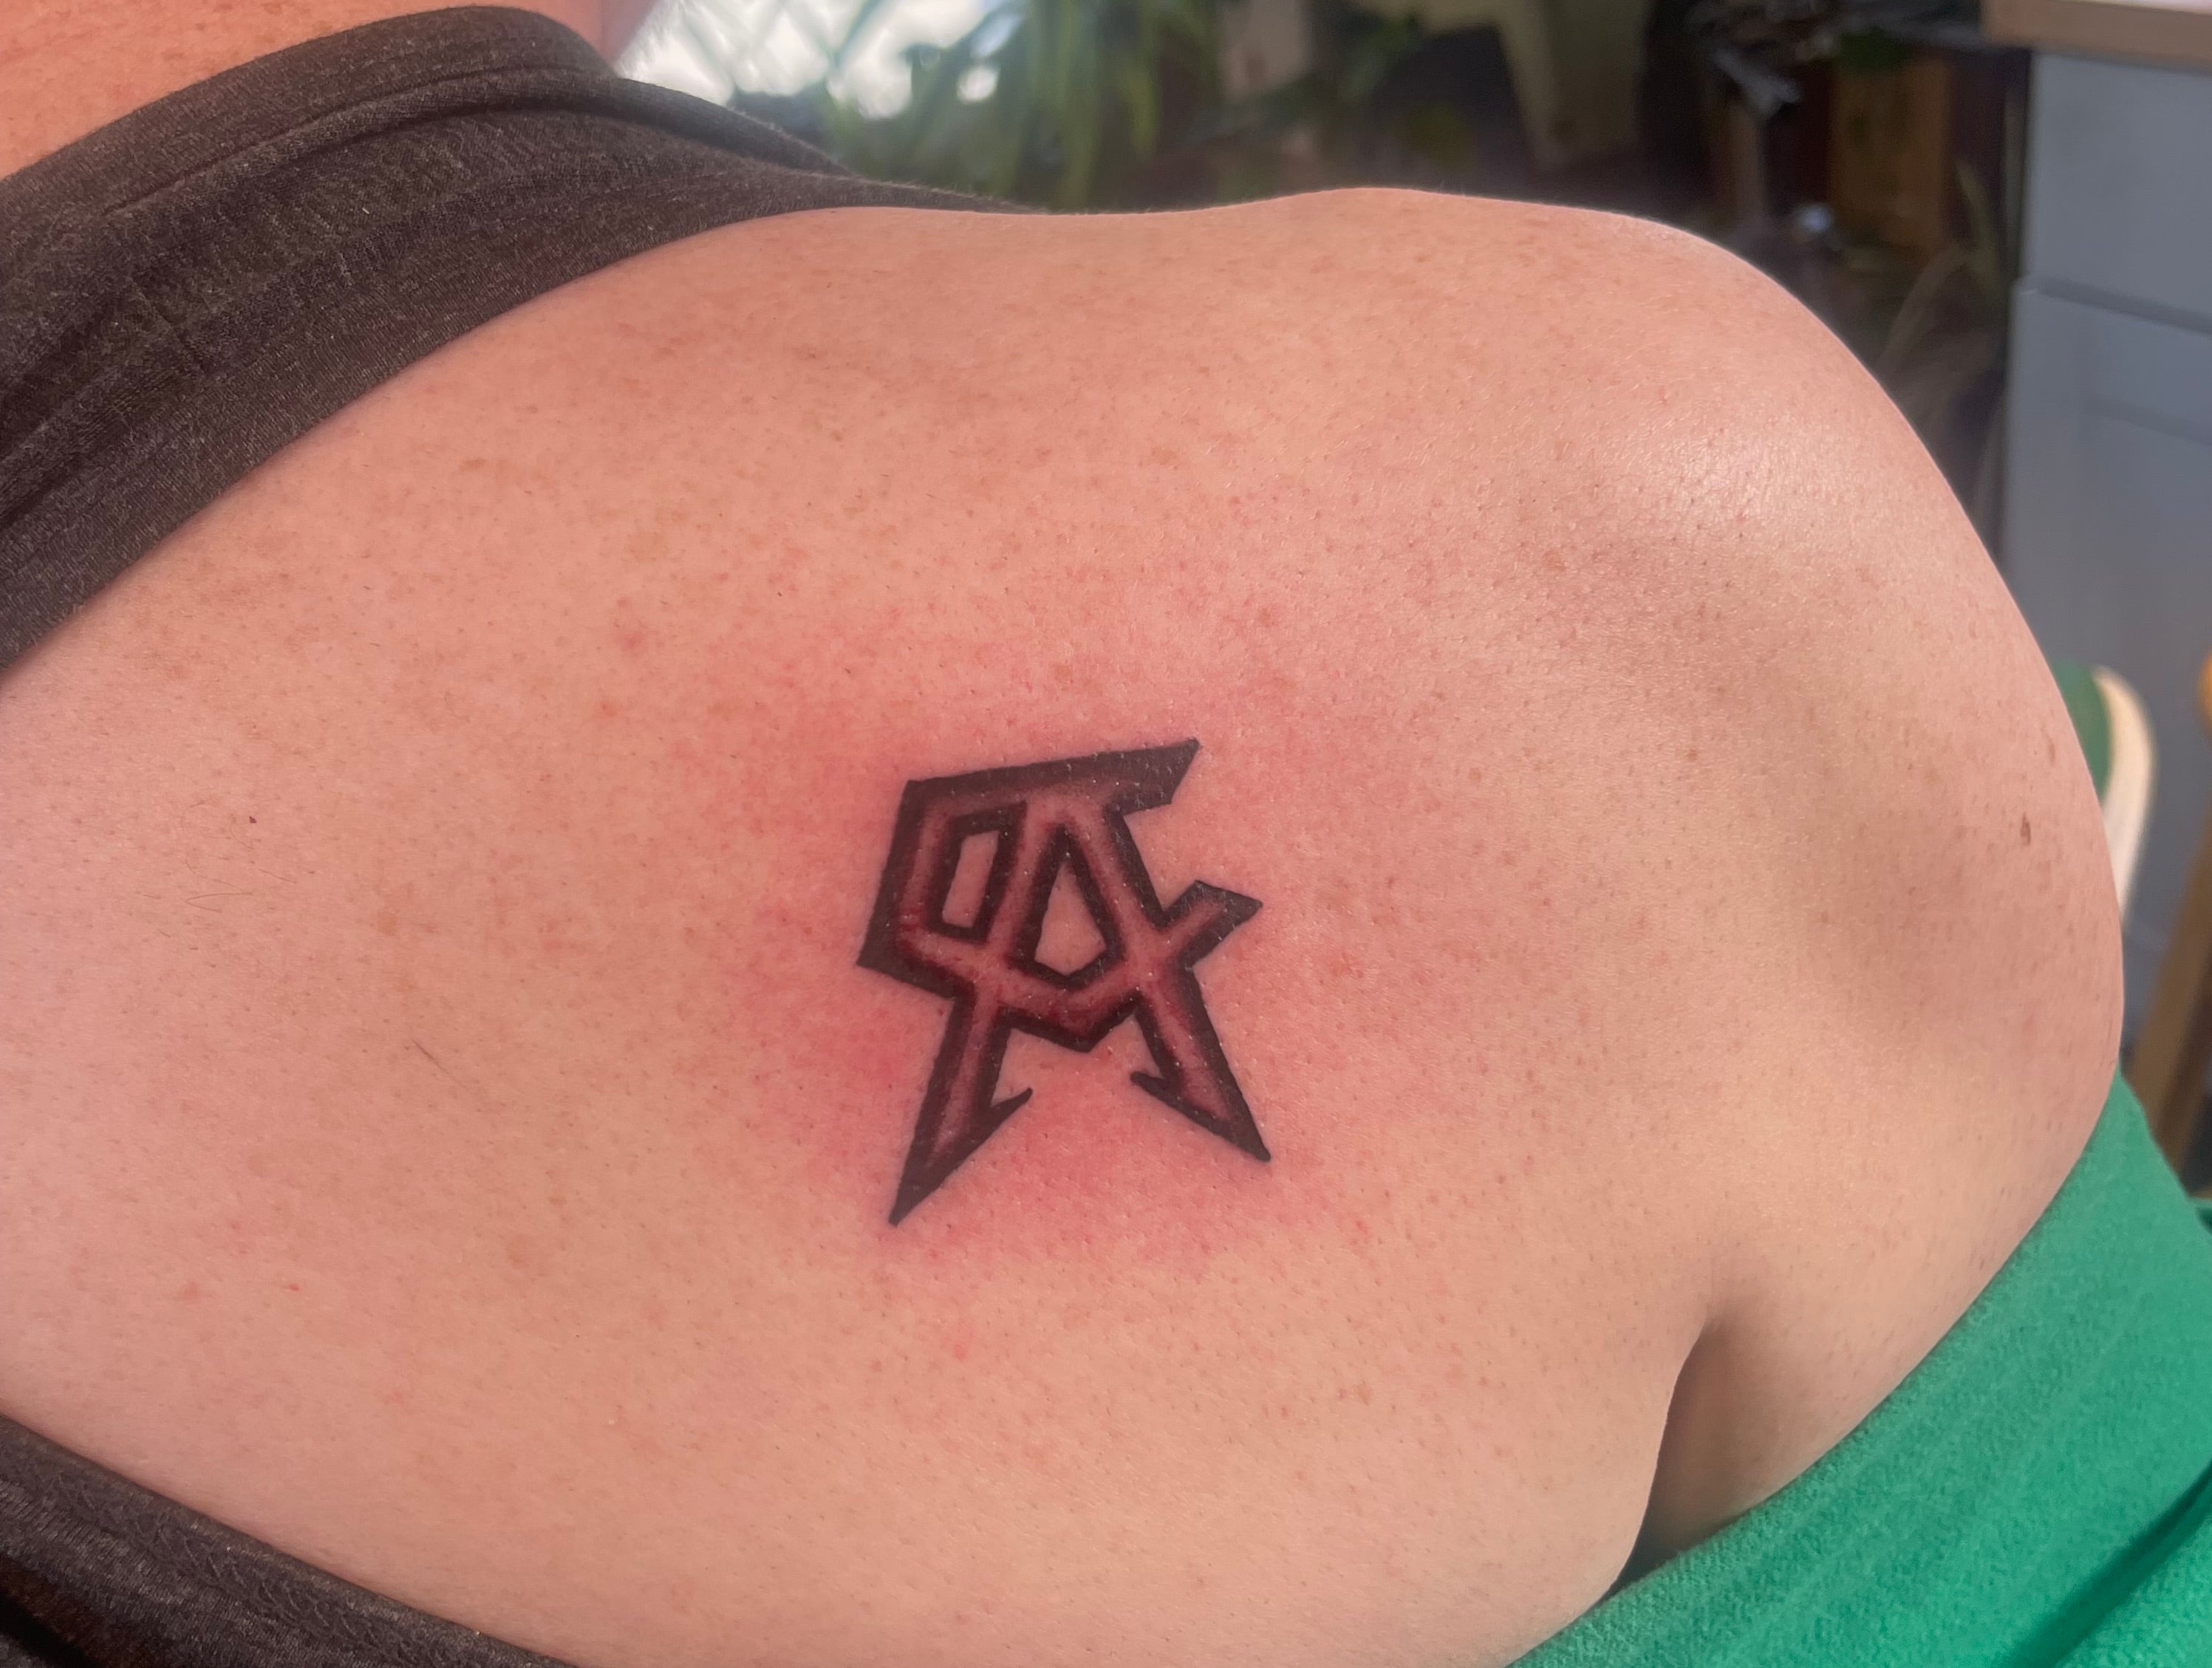 I got a tattoo to impress Canelo, and I am not sure it worked.